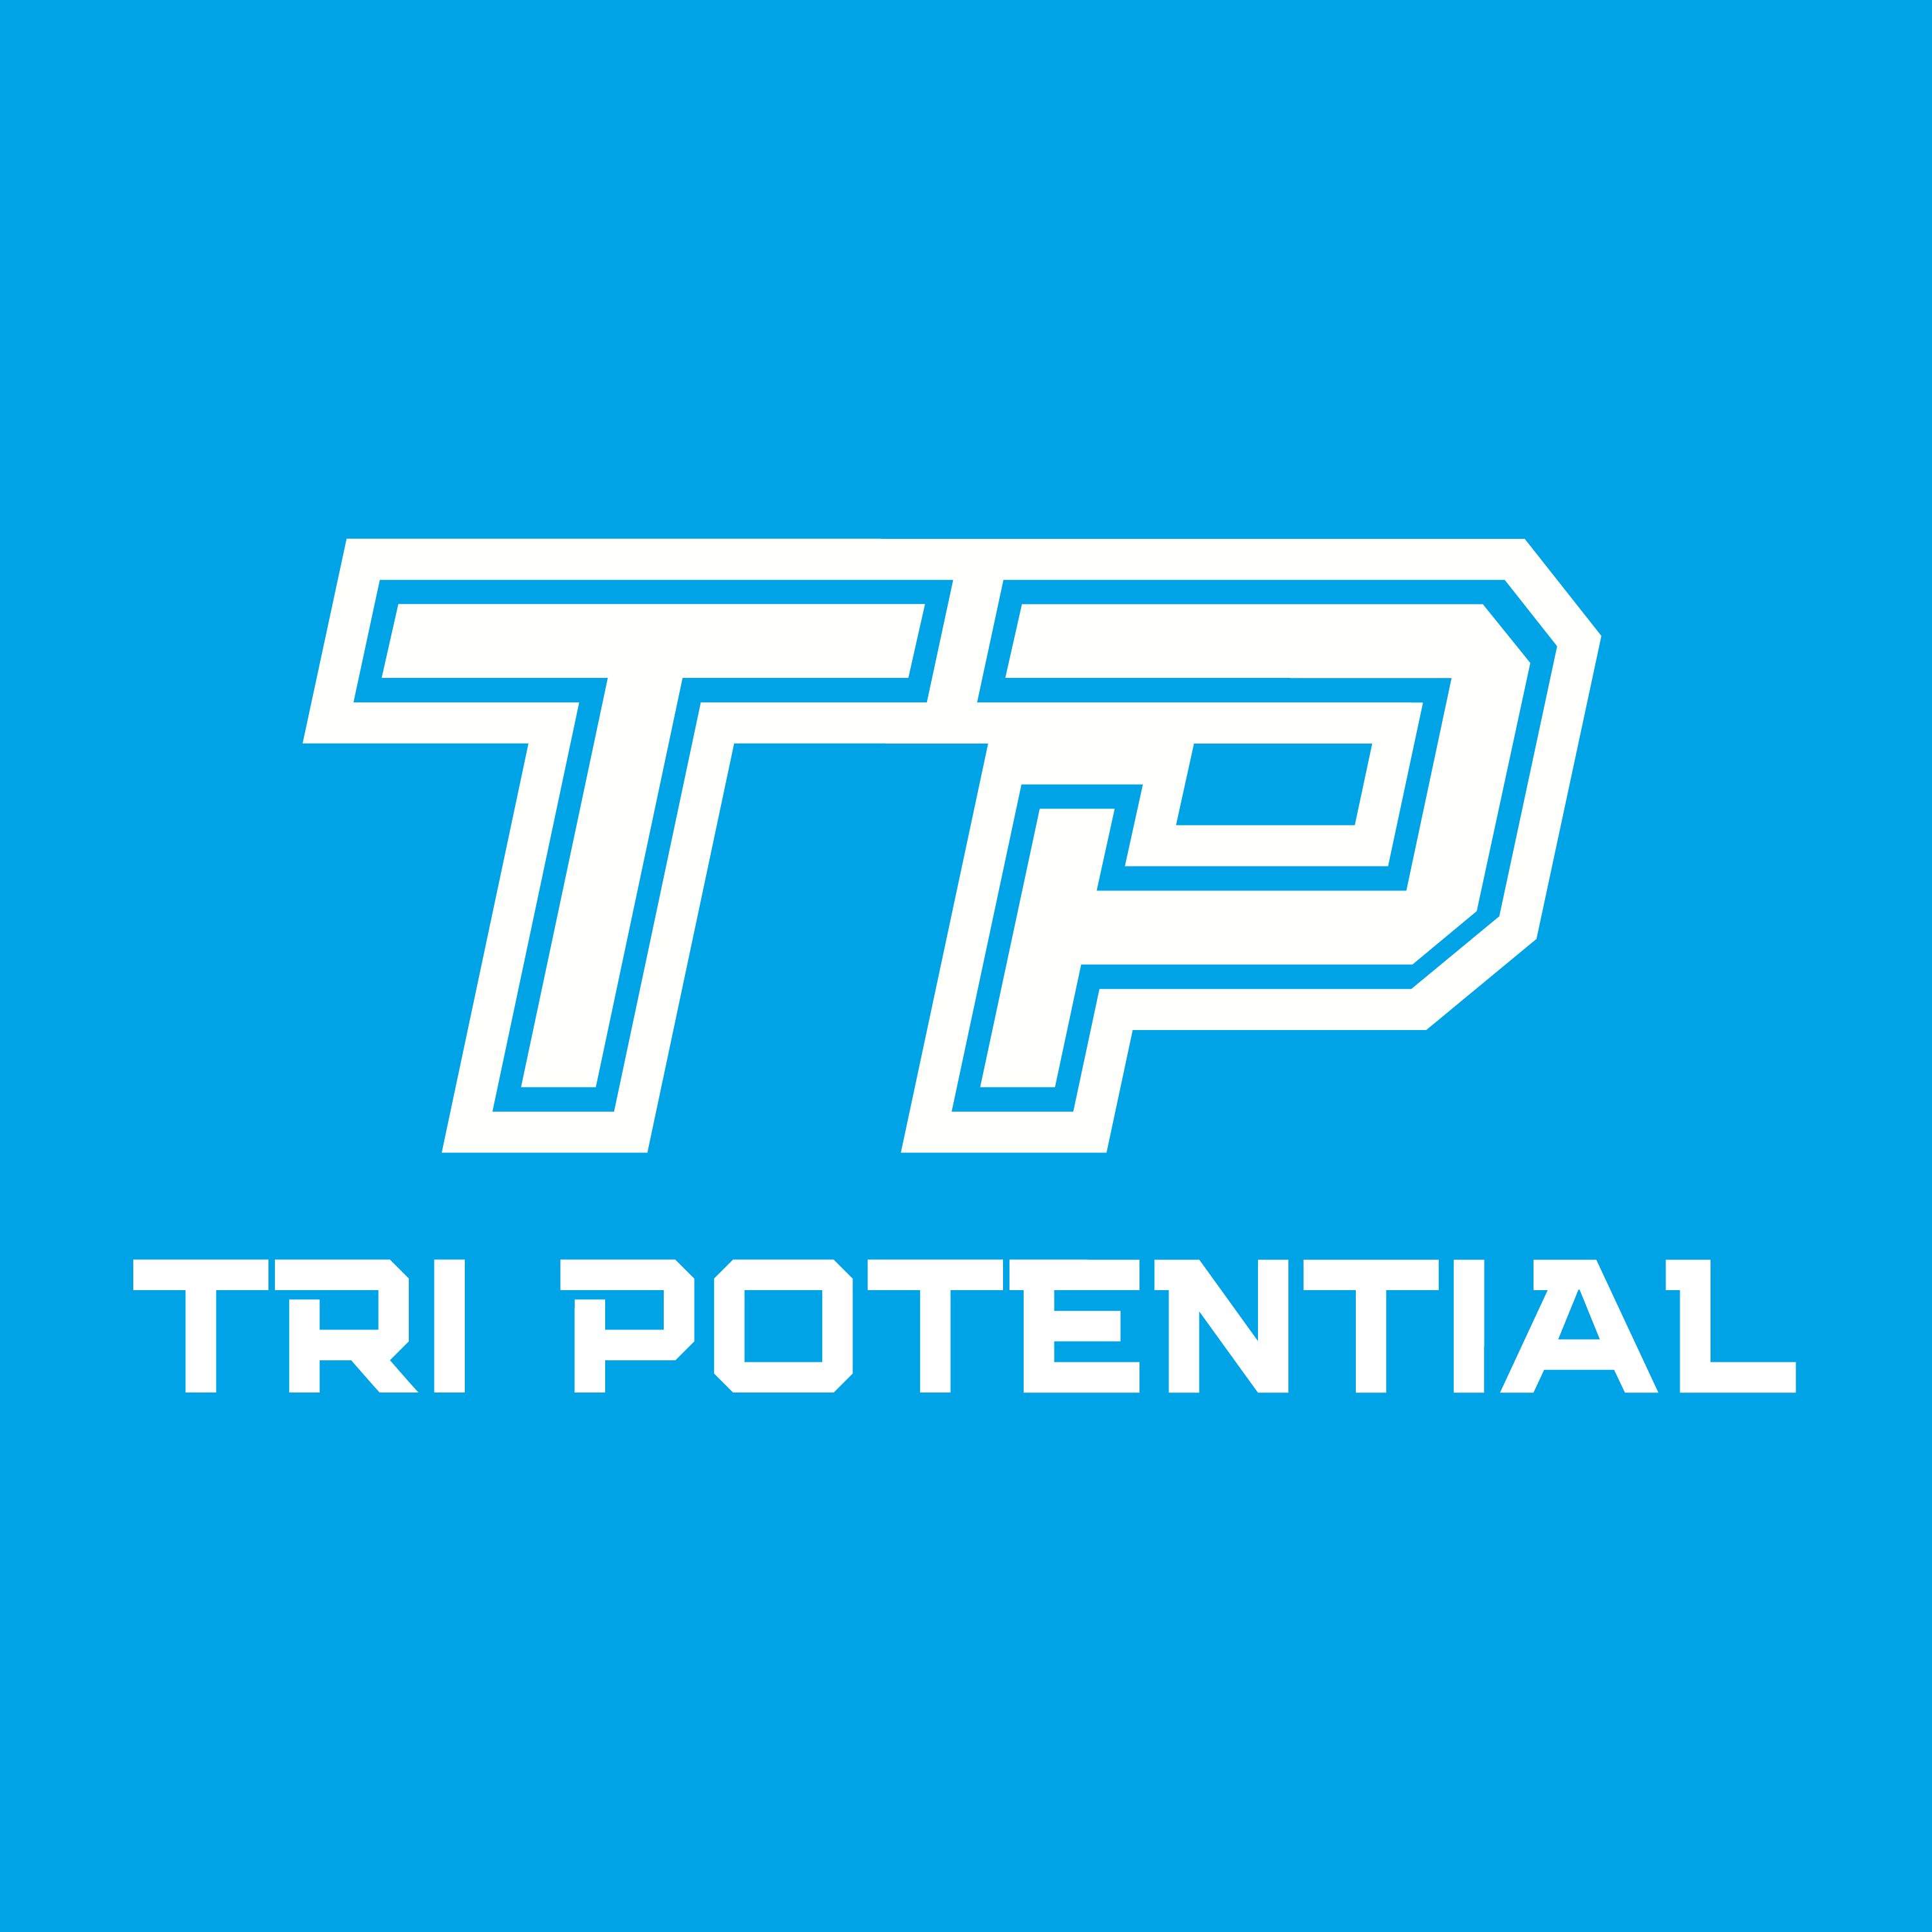 Club Image for TRI POTENTIAL